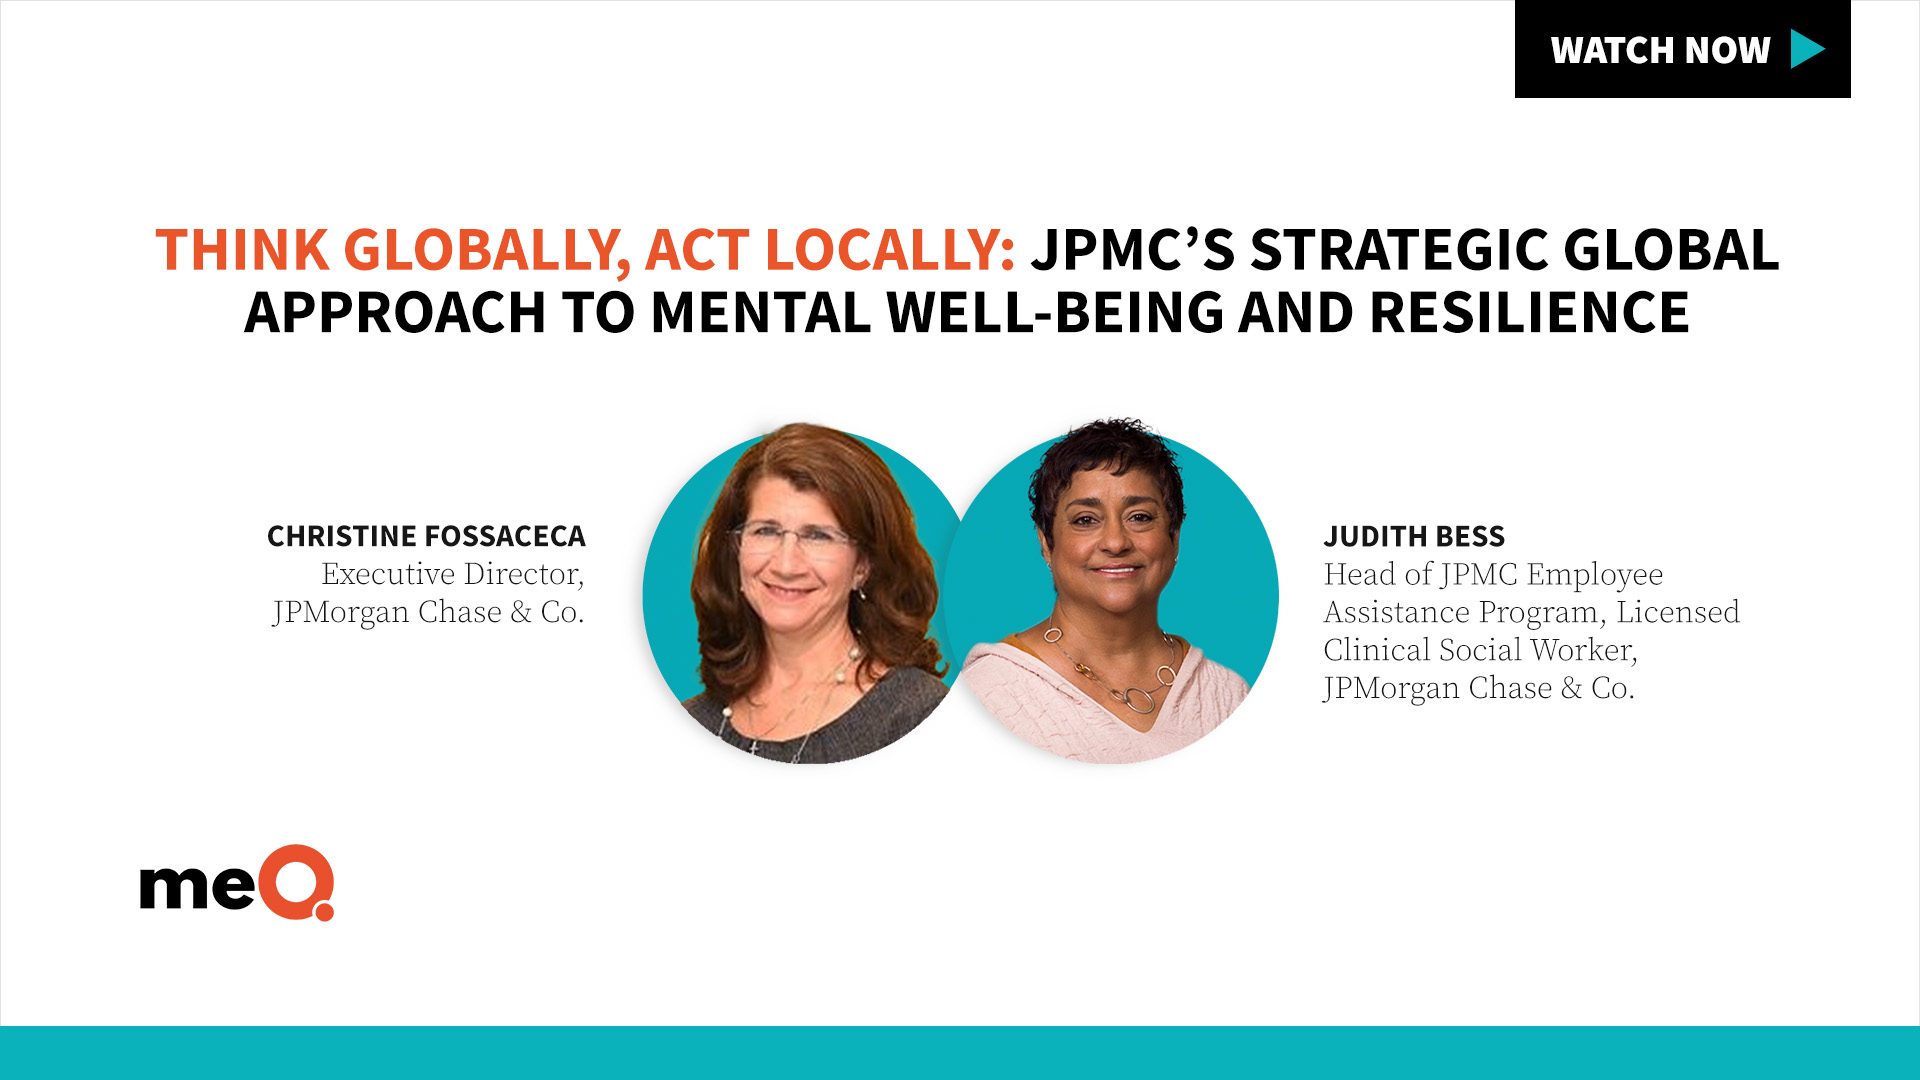 JPMC’s Strategic Global Approach to Mental Wellbeing